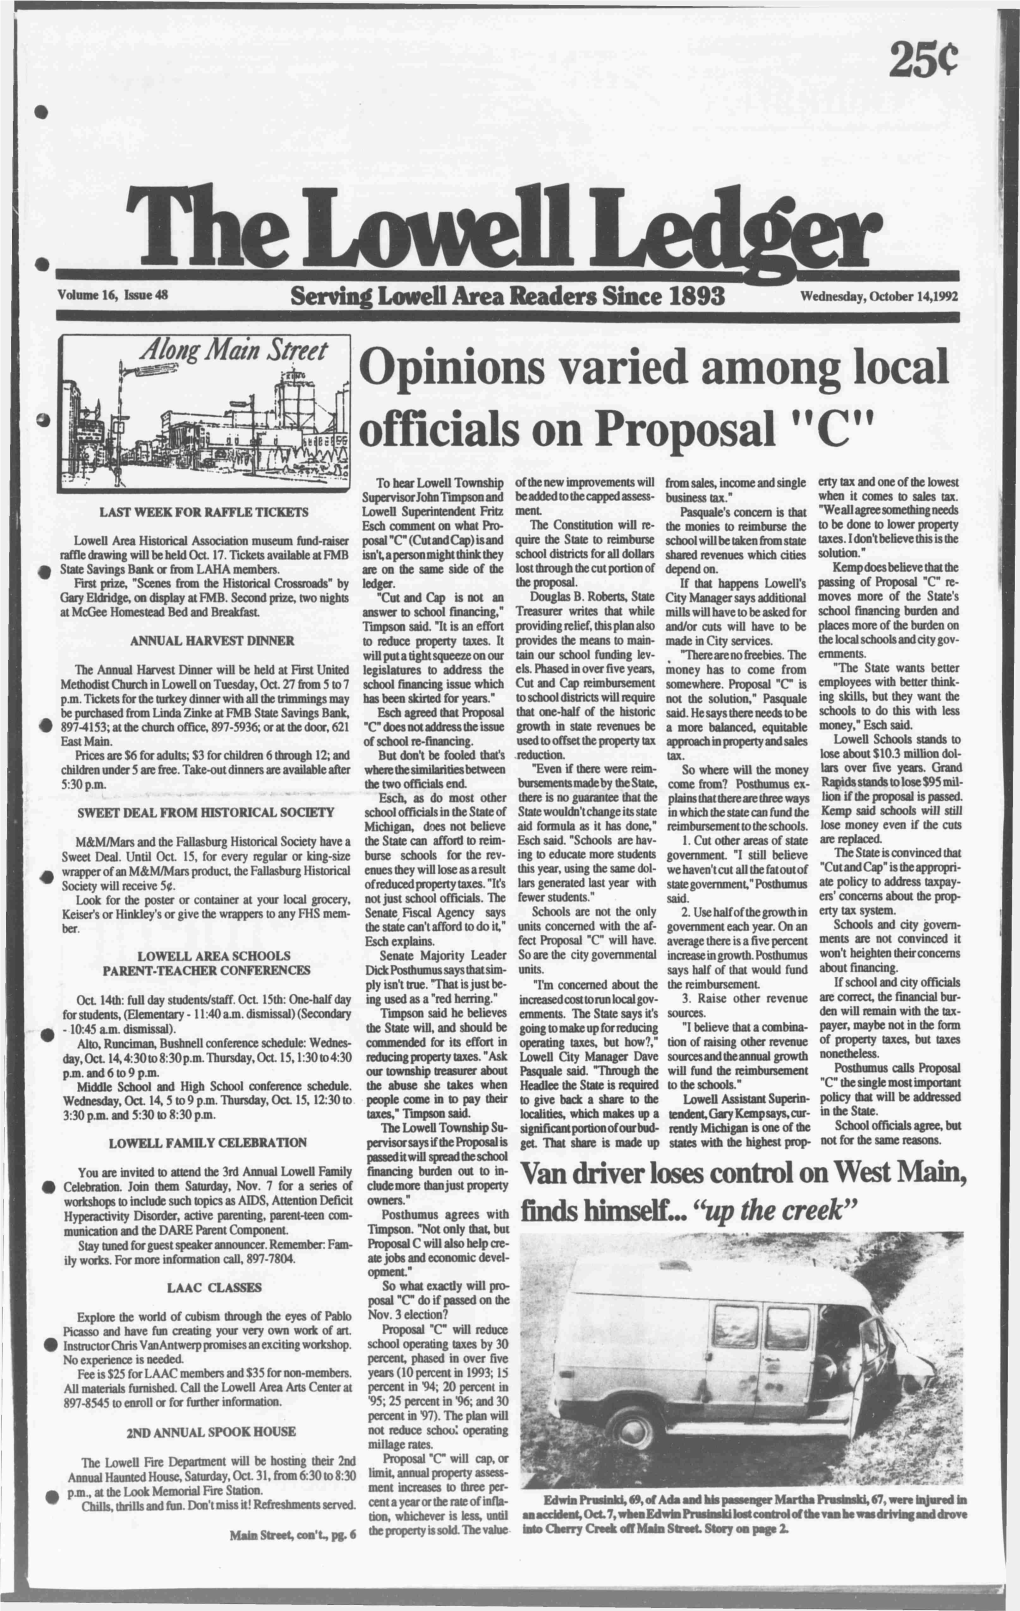 Opinions Varied Among Local Officials on Proposal